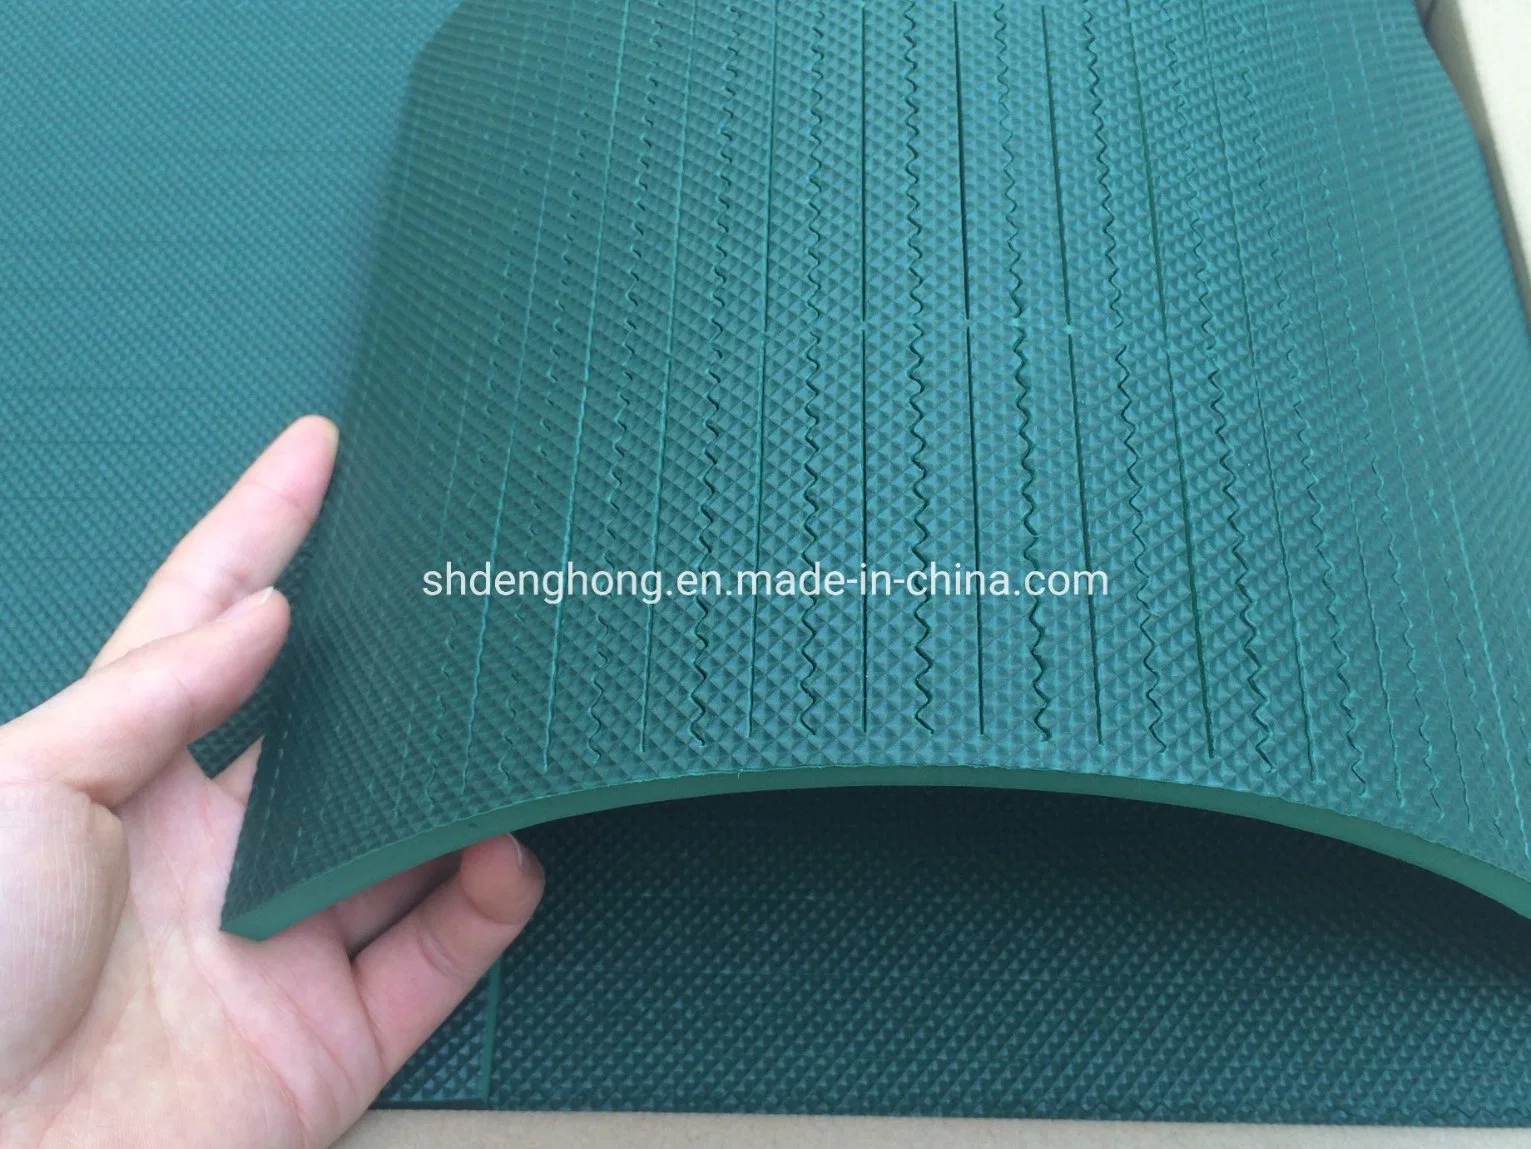 Highly elestic foam sponge Ejection Rubber for Die cutting